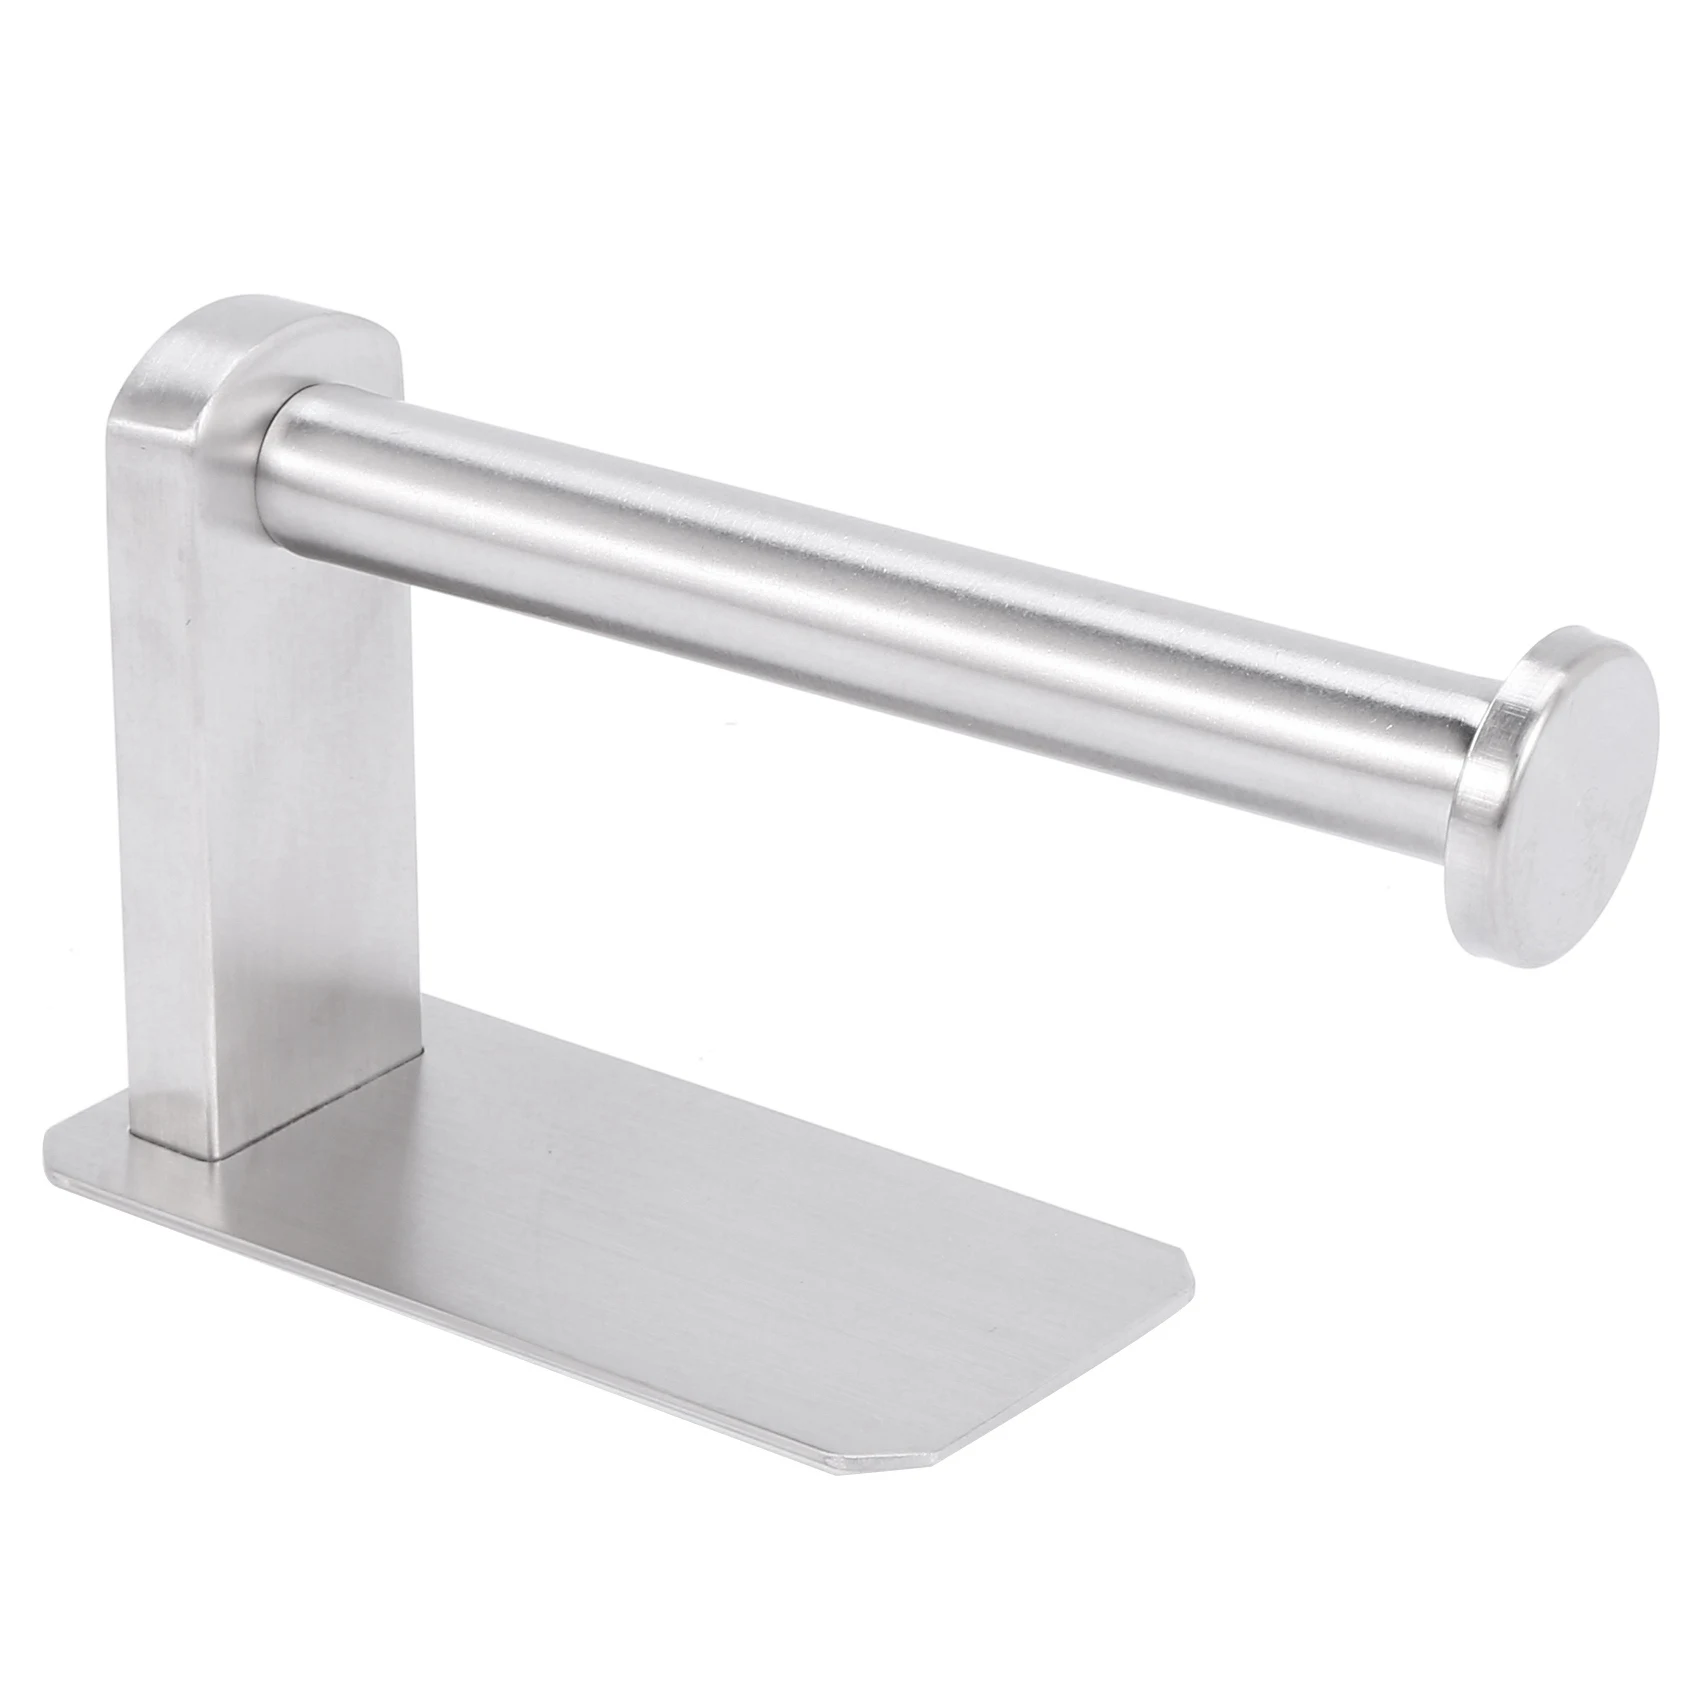 

Self Adhesive Toilet Paper Holder SUS 304 Stainless Steel No Drilling Bathroom Kitchen Tissue Paper Roll Towel Holder Rustproof,